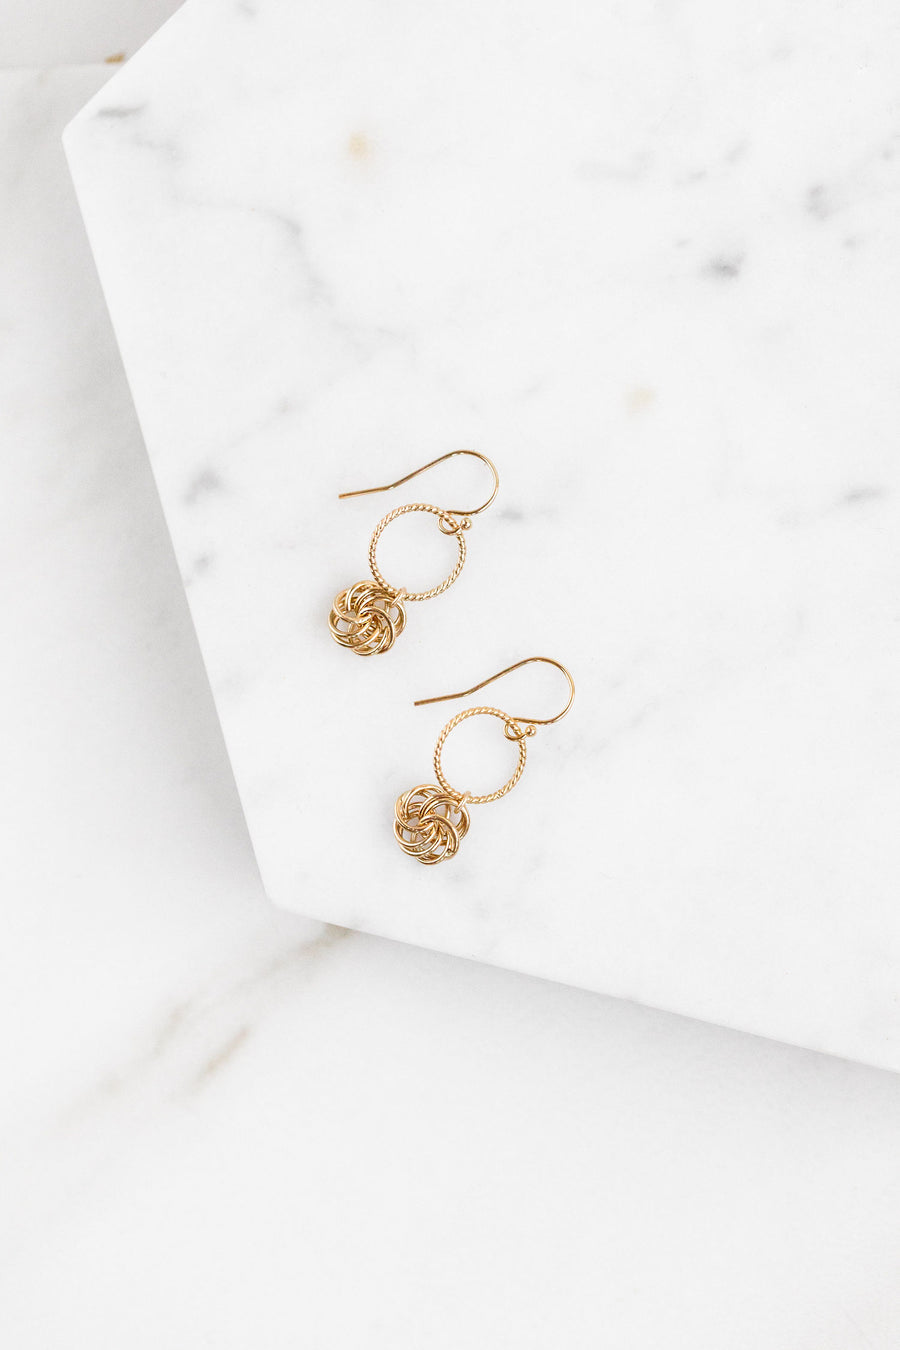 Find the perfect pair of earrings you're looking for from Charme Silkiner! These 14k gold hoop earring with a flower detail charm is seriously stunning. Perfect to dress or dress down any outfit the Malina Earrings are the perfect must have for everyone!